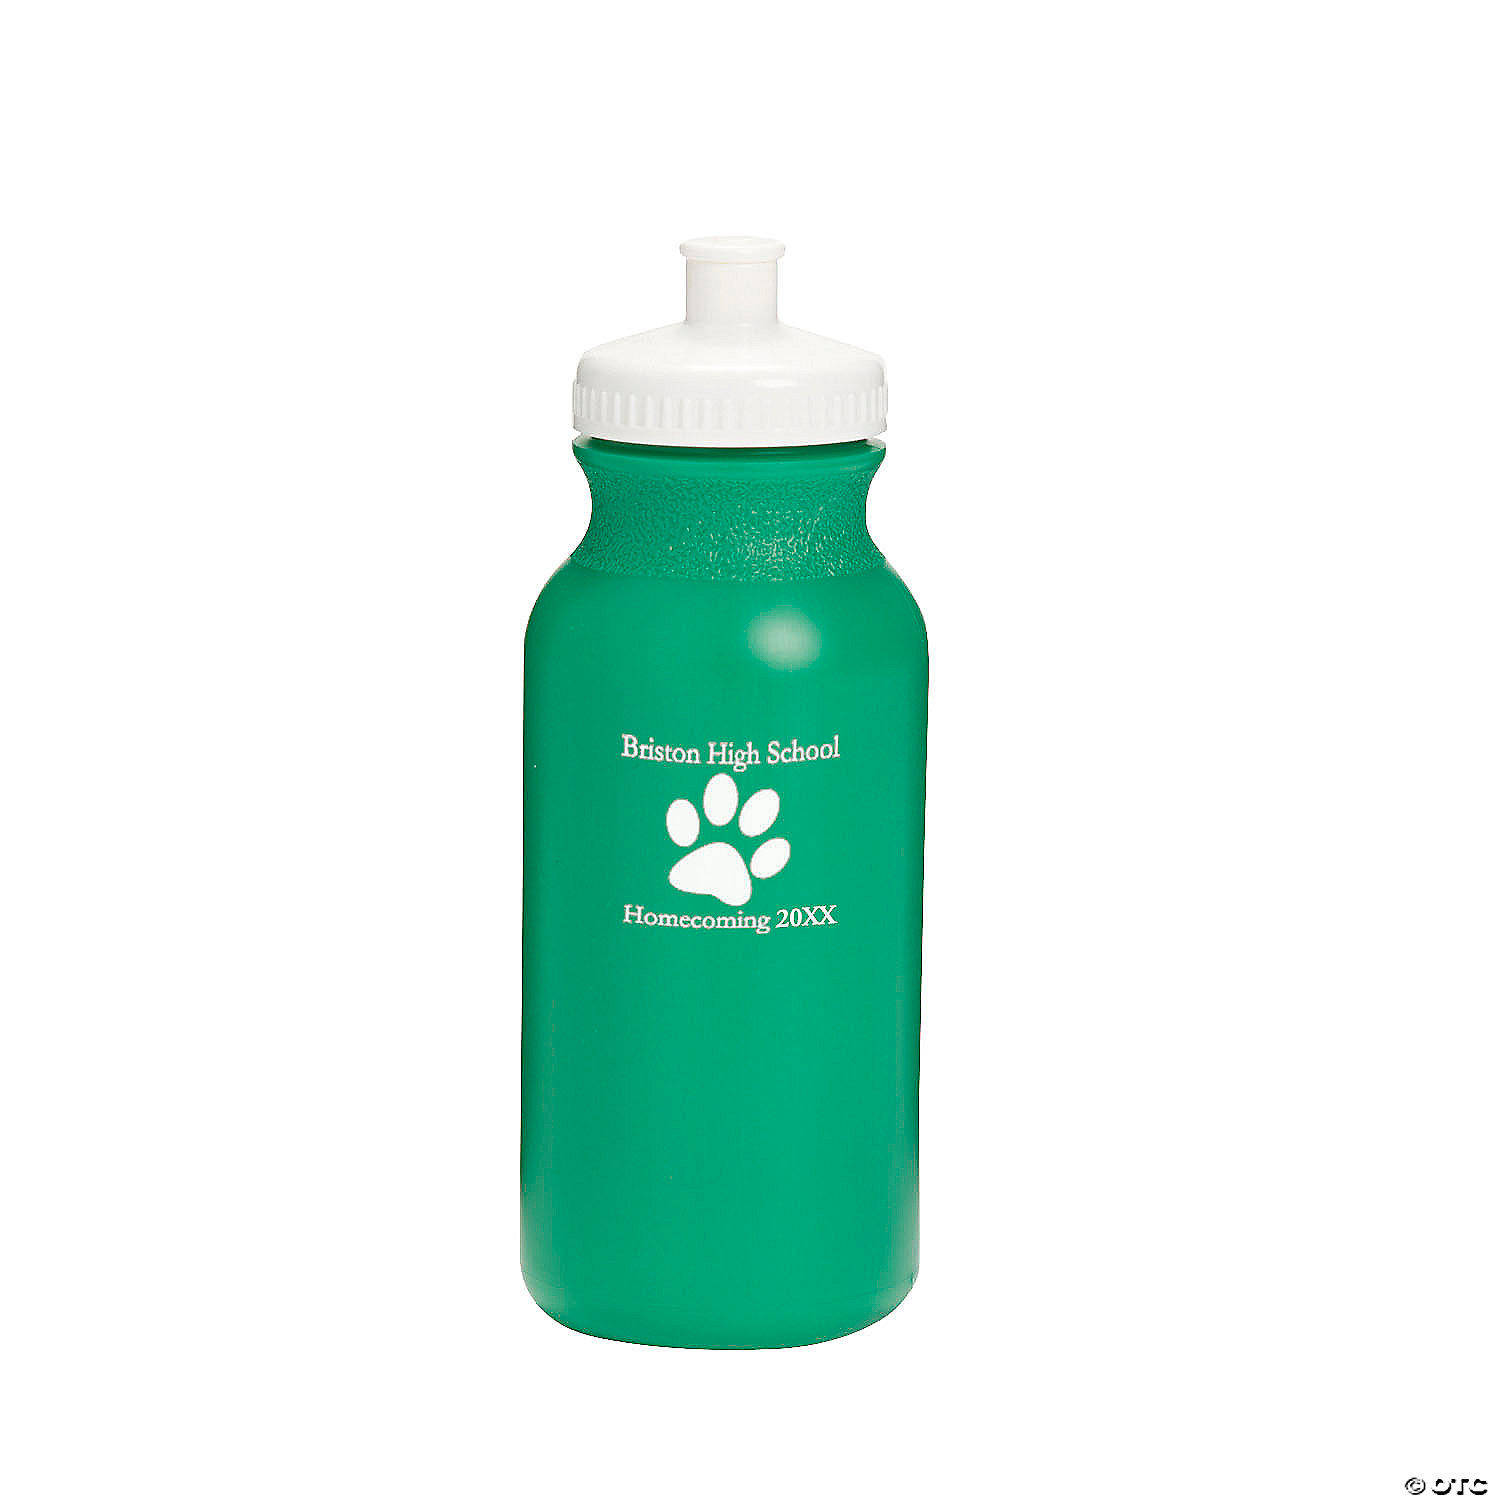 Plastic Opaque Green Paw Print Personalized Water Bottles - 20 oz